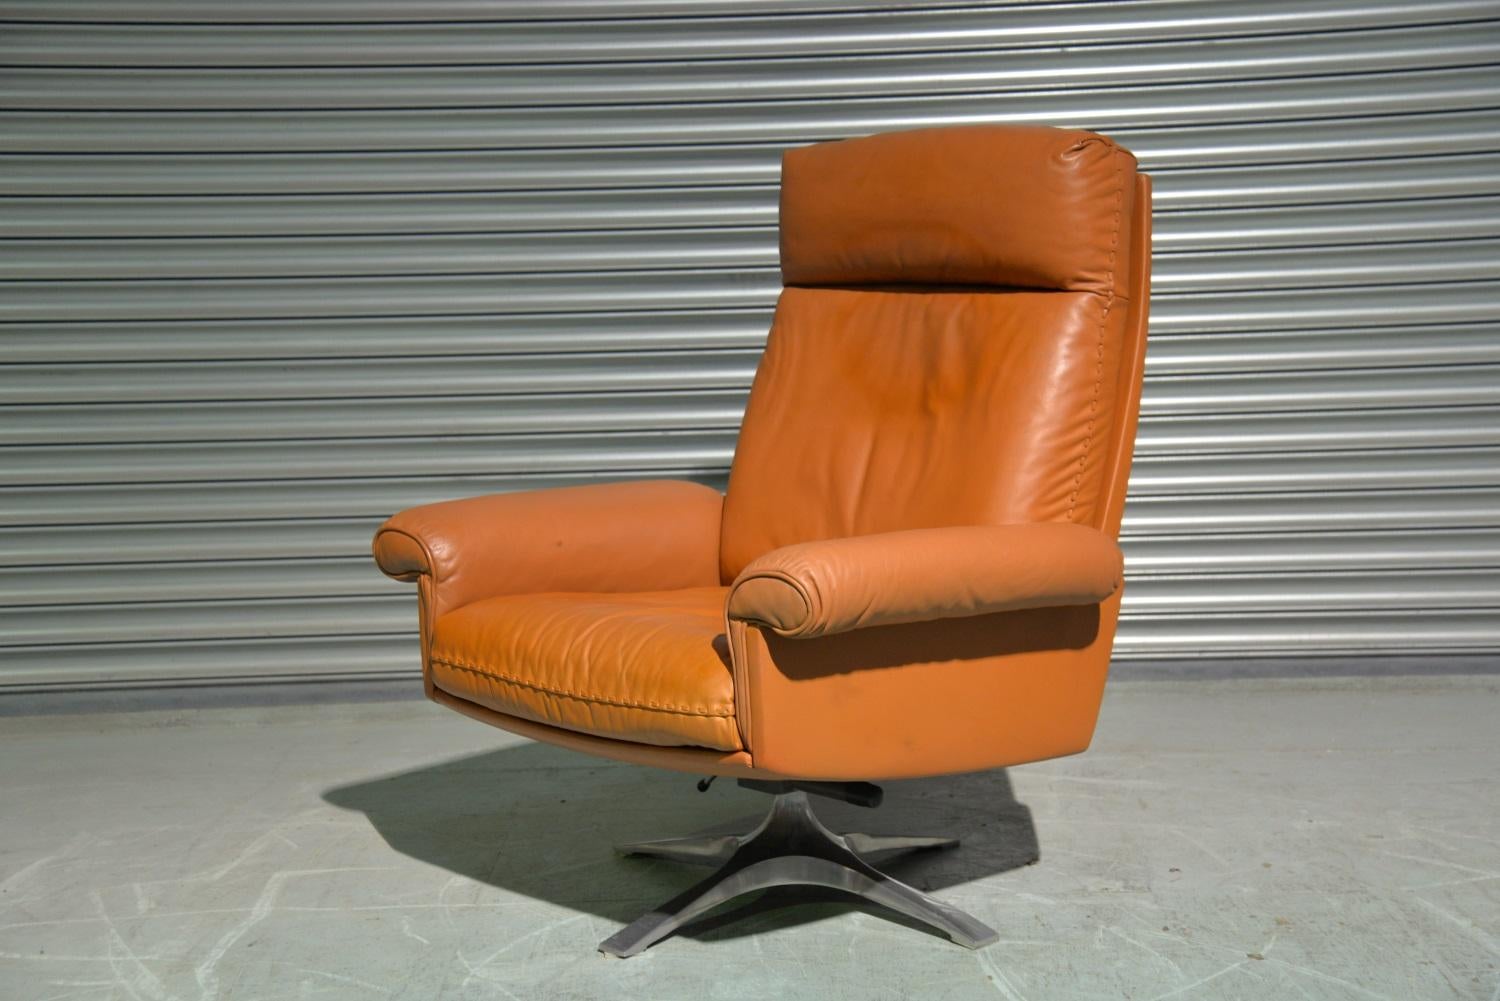 Discounted airfreight for our US and International customers (from 2 weeks door to door)

We are delighted to bring to you a vintage 1970s De Sede DS 31 swivel high-back armchair. The armchair was hand built circa 1970s by De Sede craftsman from